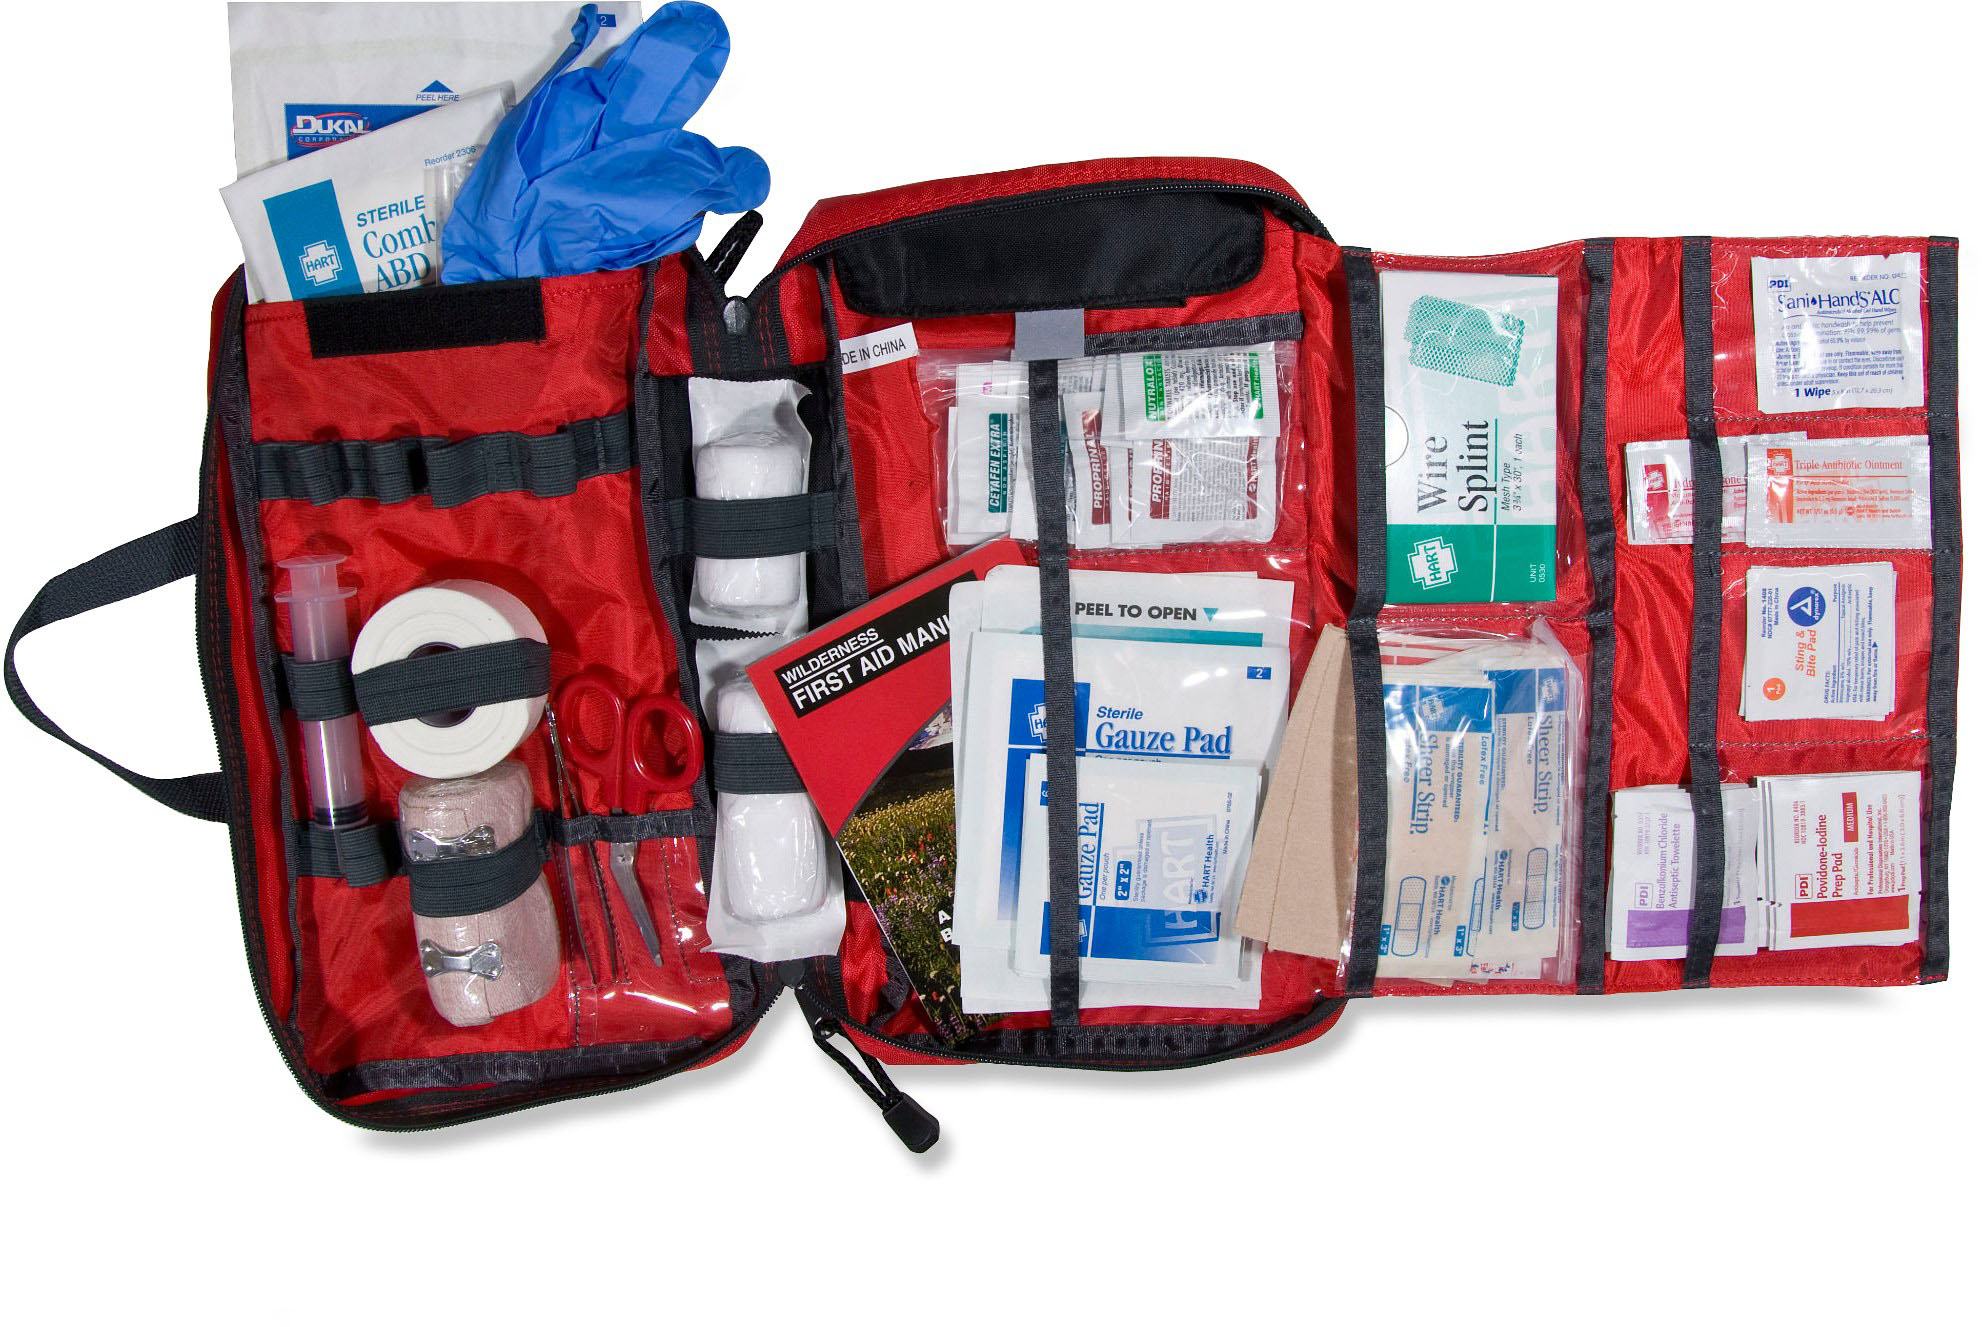 First Aid Kit – First aid for free